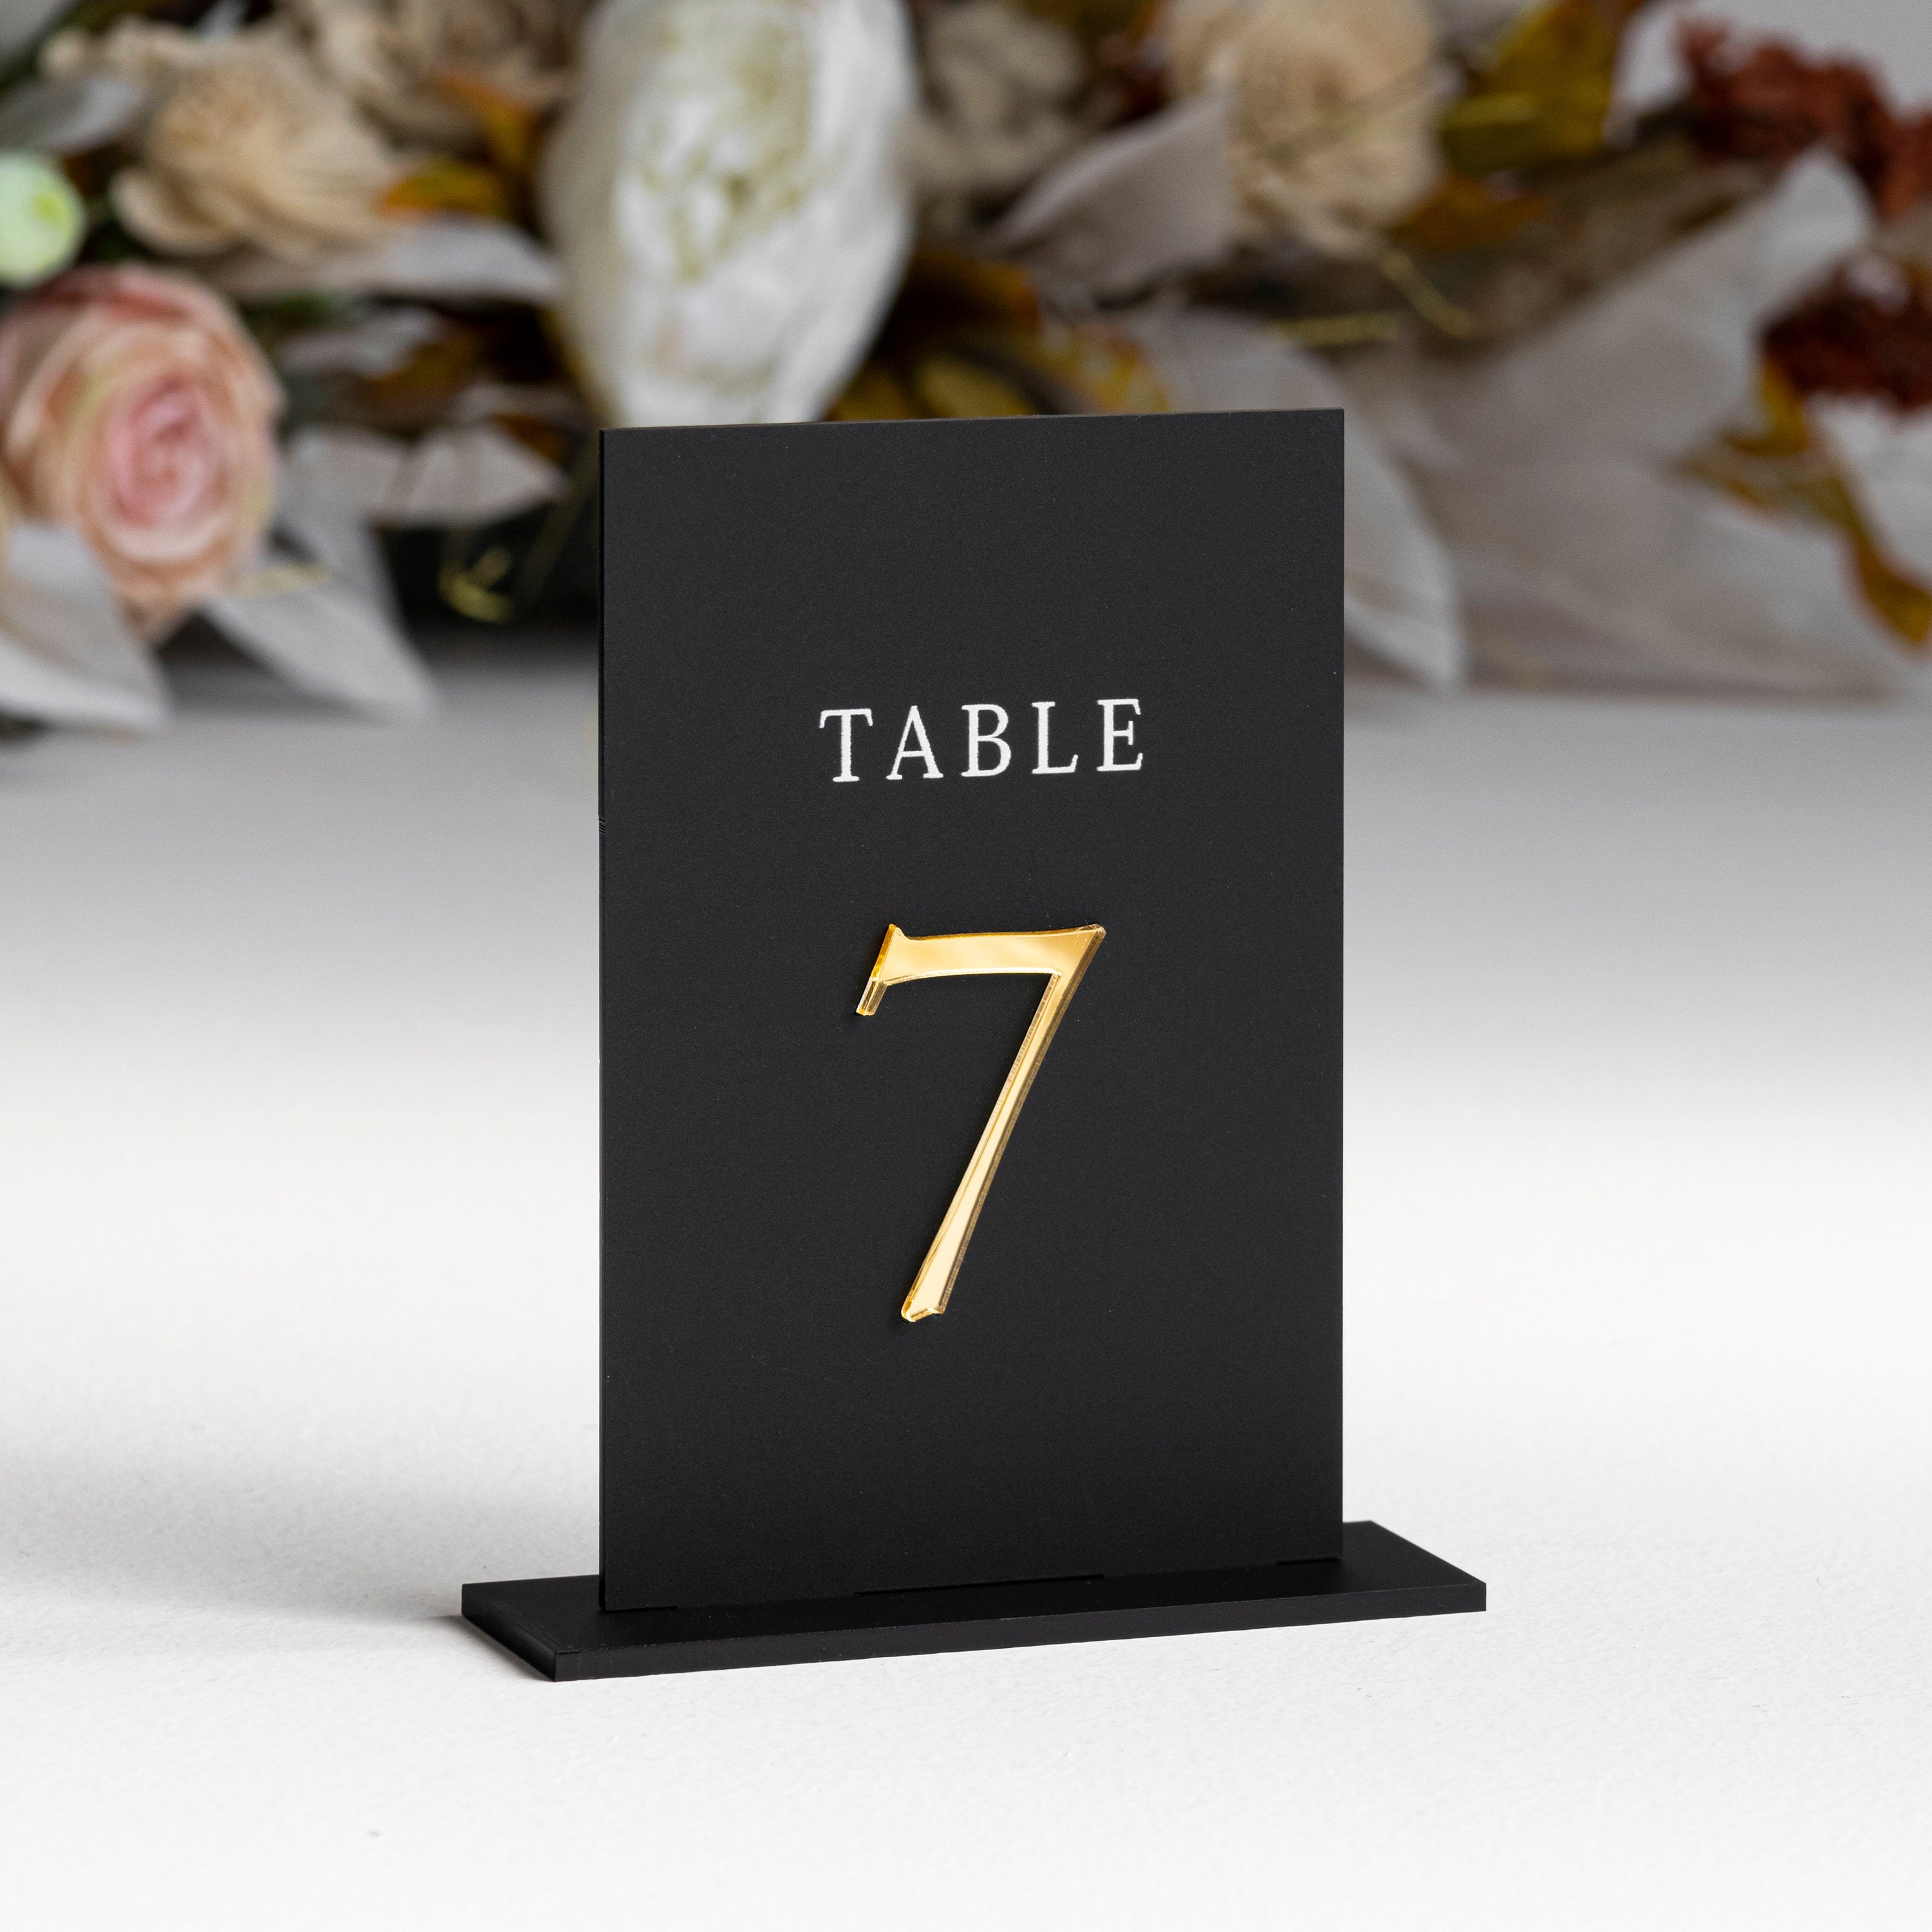 Matt Black Acrylic Table Numbers - Wedding Table Decor - Wedding Signage - Table Signs - Table Numbers - Wedding Stationery - Reception Sign